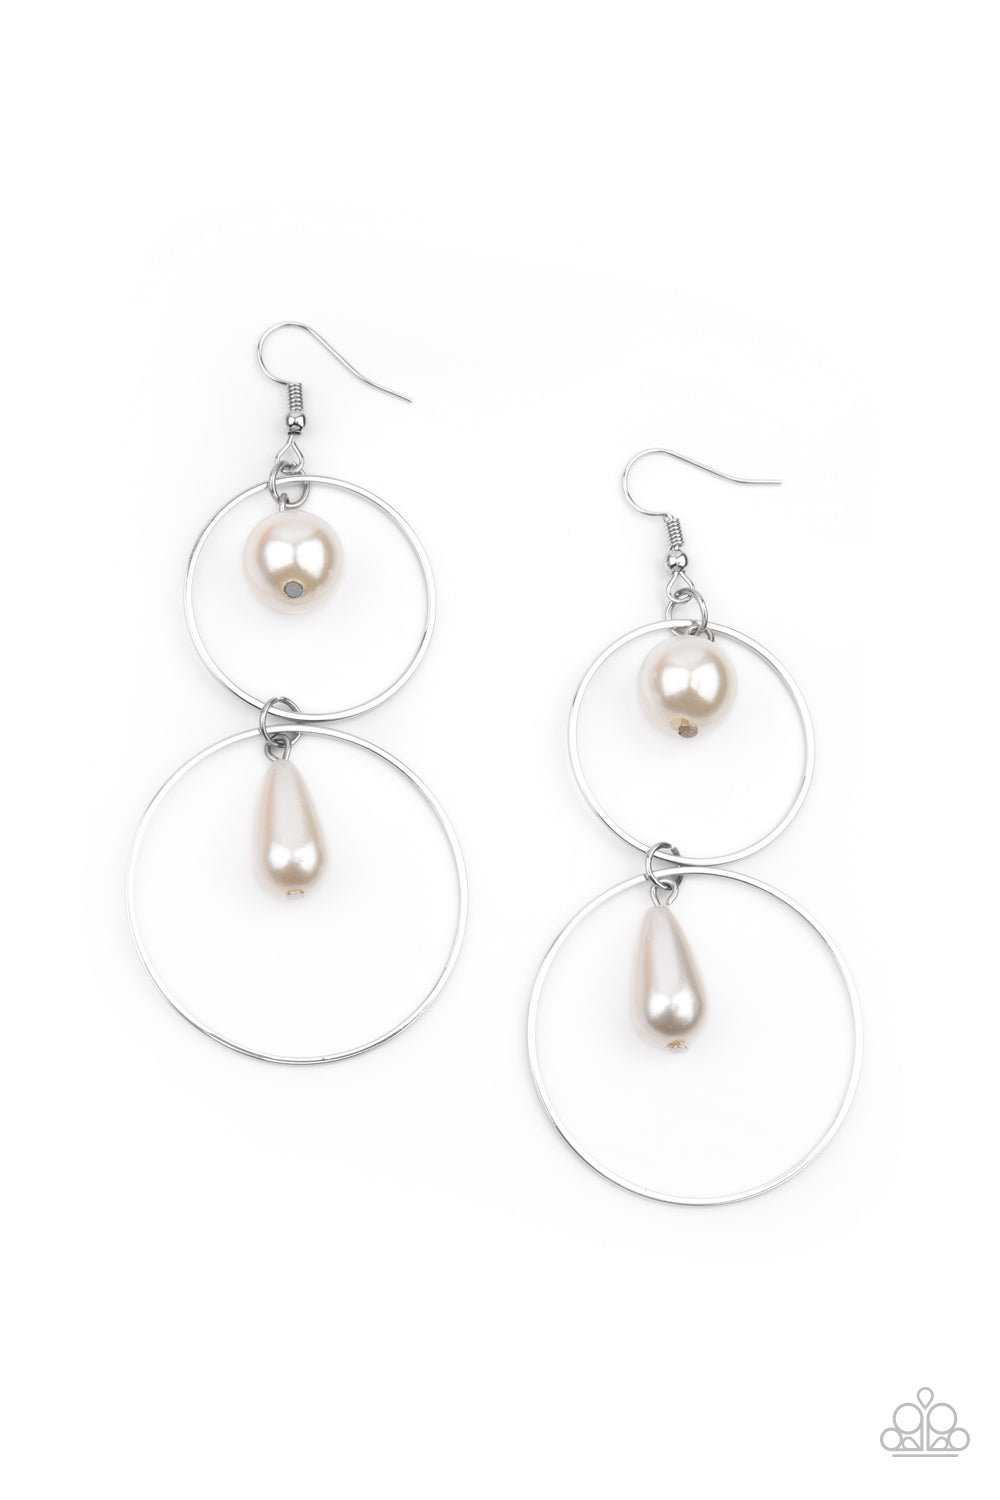 Cultured in Couture White Pearl Earring - Paparazzi Accessories  A classic white pearl swings from the top of a shiny silver hoop that is linked to another silver hoop by a pearly teardrop bead, creating a stunningly stacked display. Earring attaches to a standard fishhook fitting.  ﻿All Paparazzi Accessories are lead free and nickel free!  Sold as one pair of earrings.